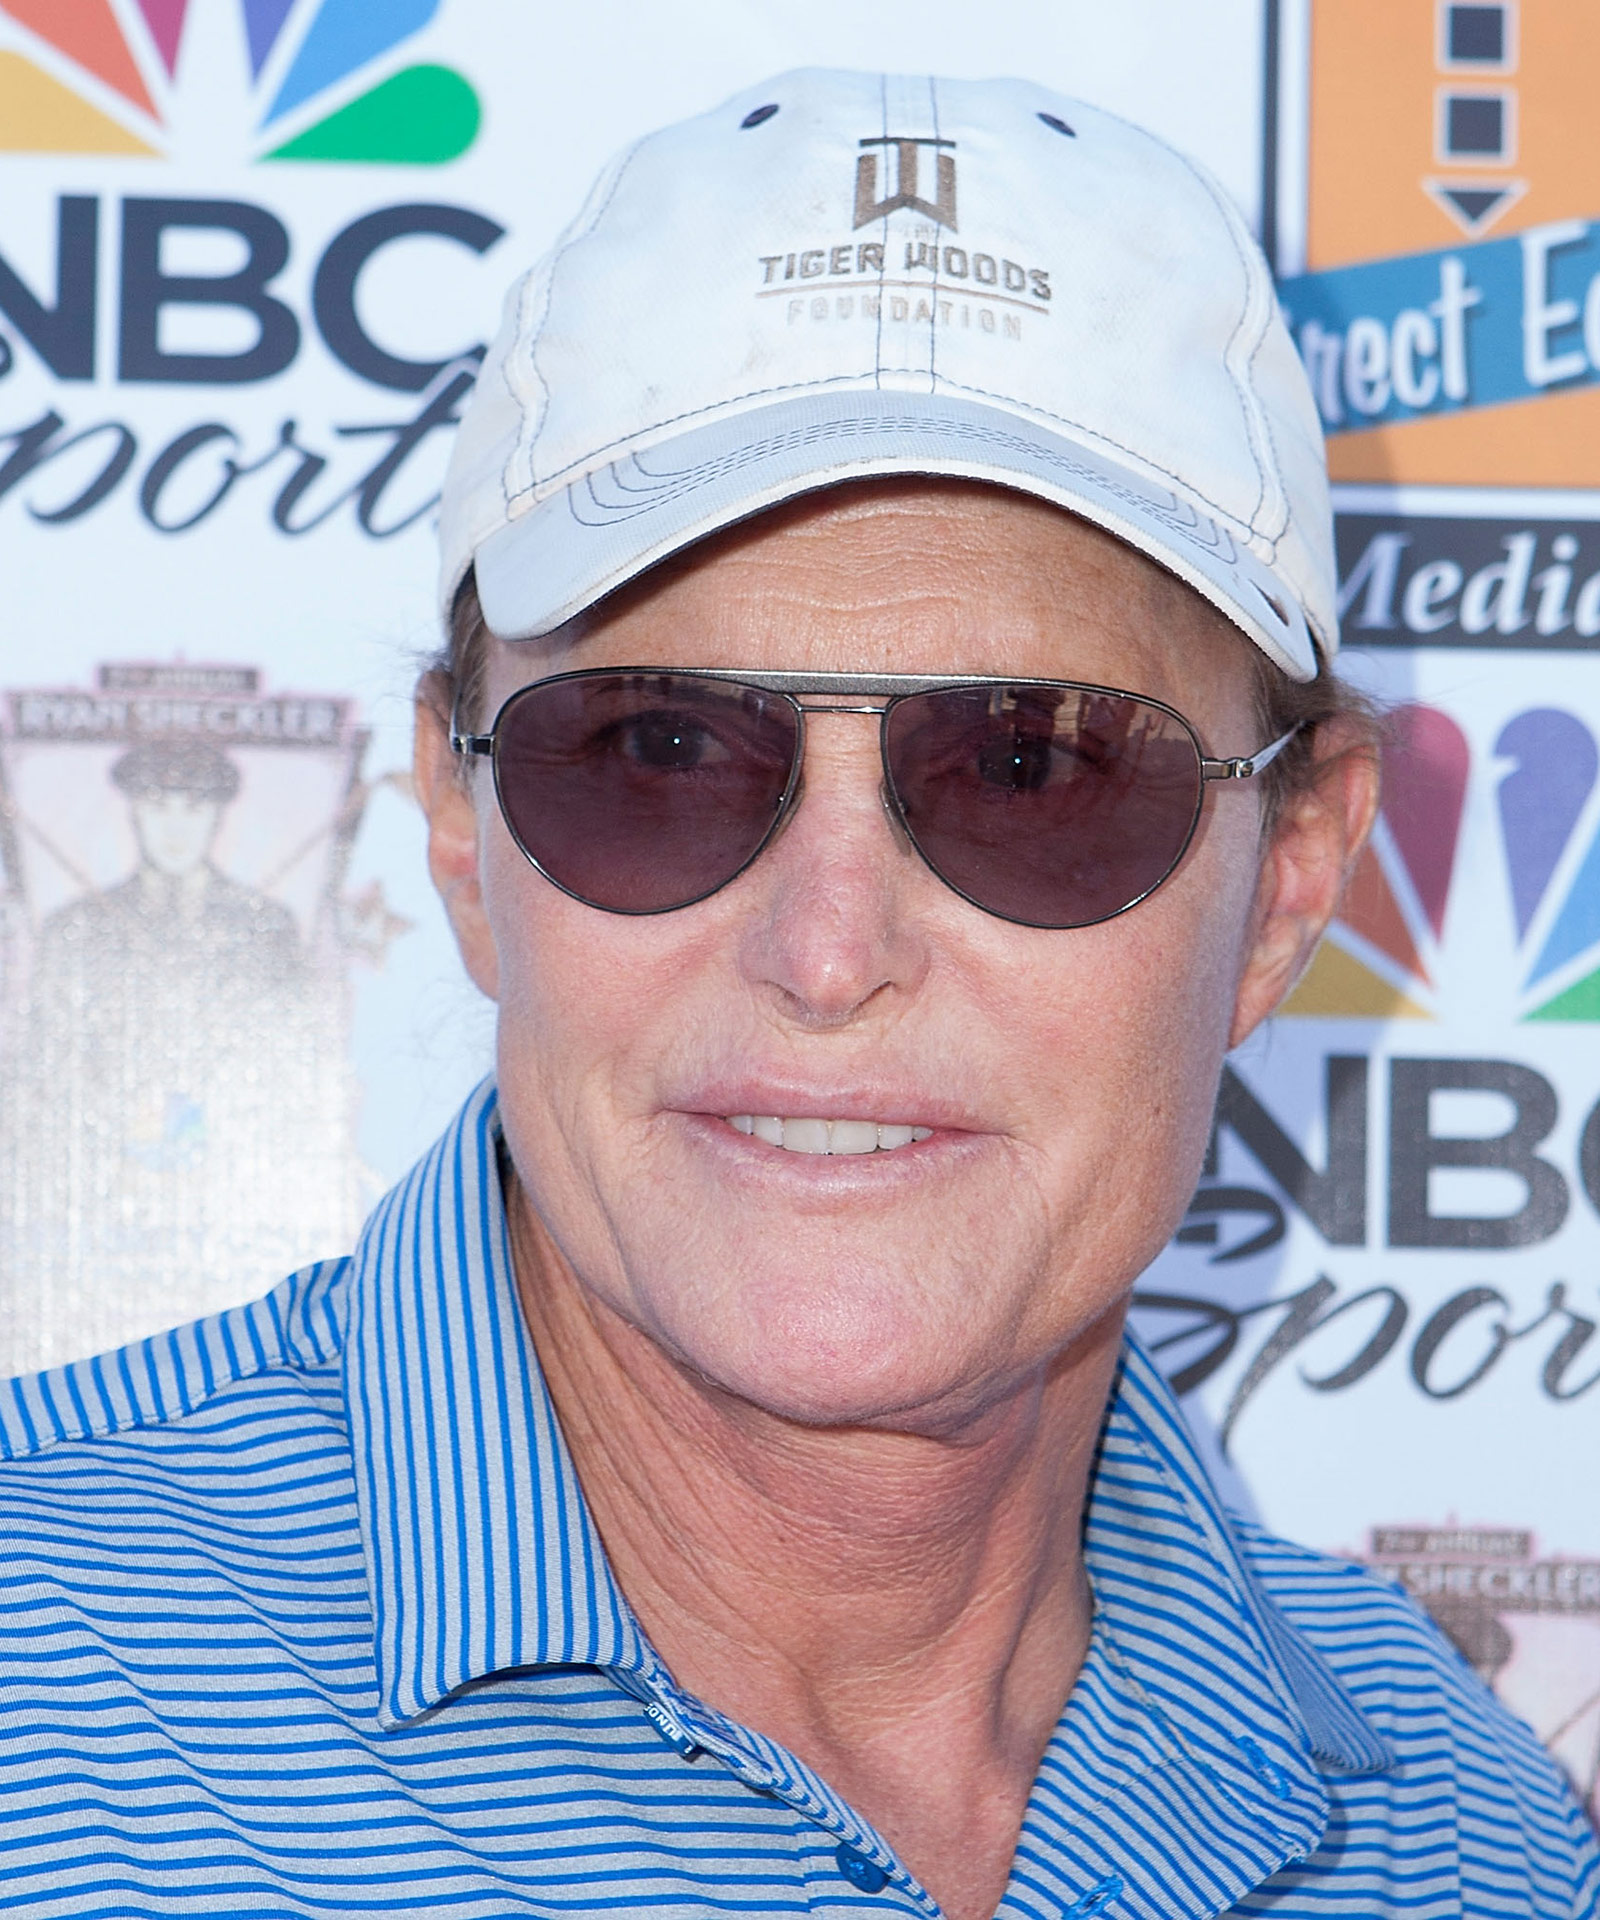 “It made me who I am”: Bruce Jenner opens up to Diane Sawyer in new teaser